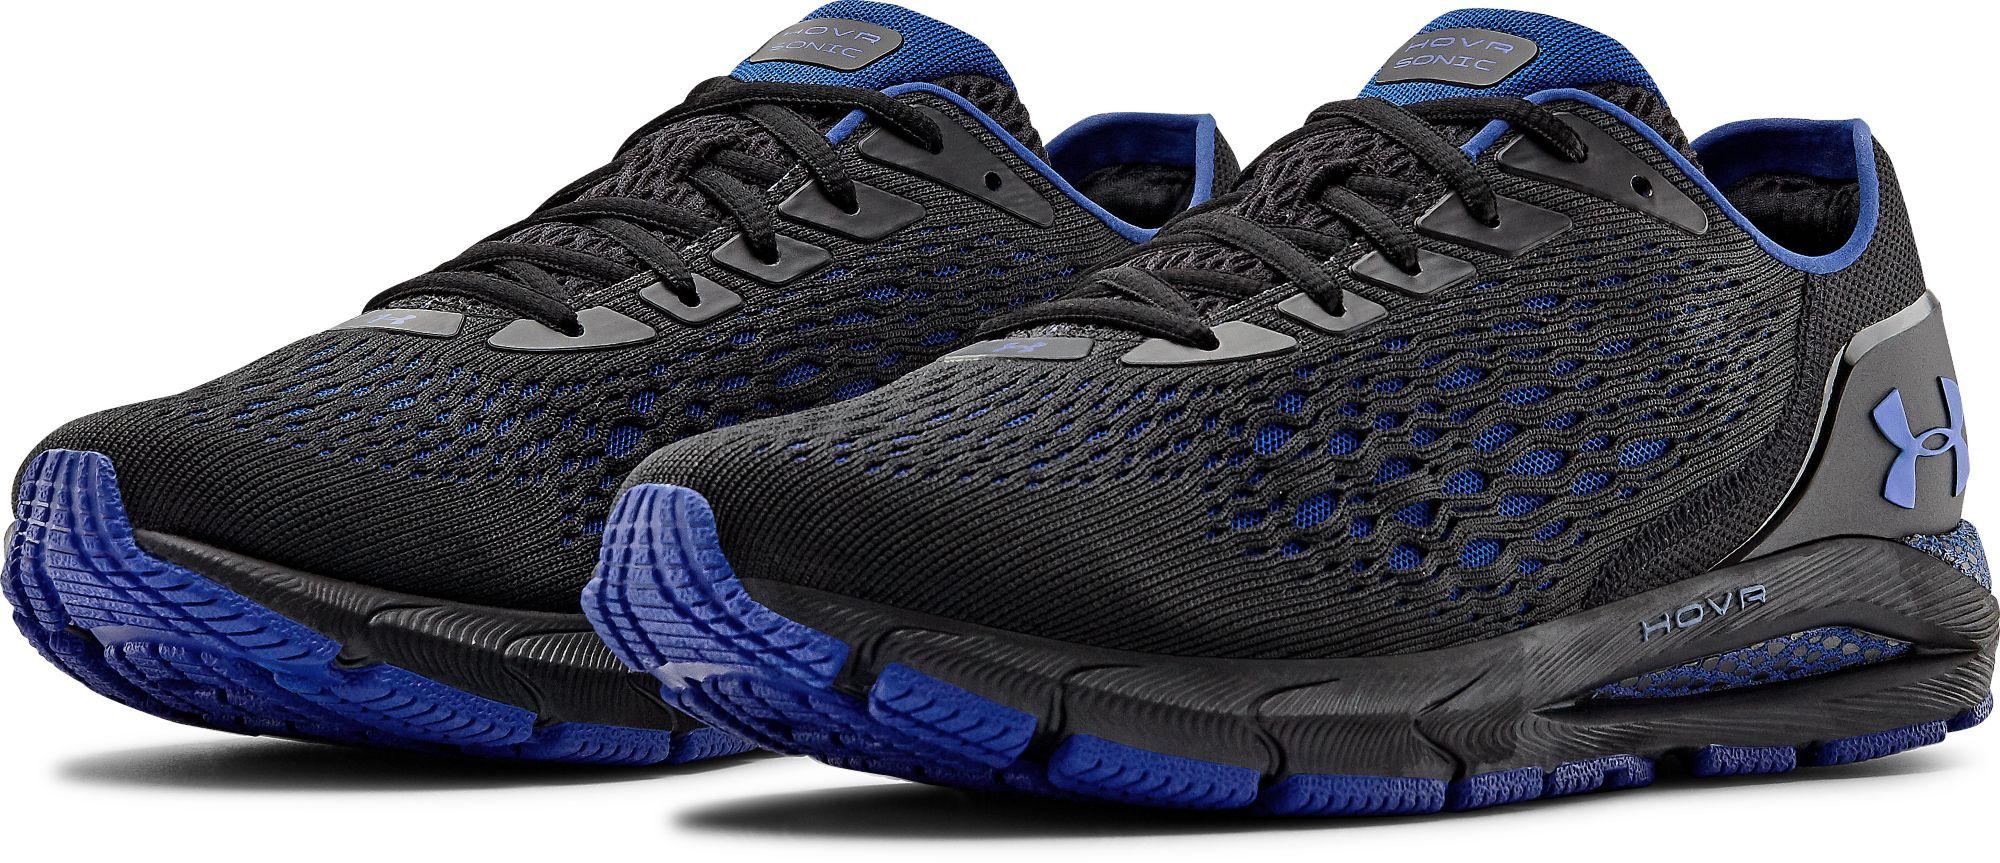 Under Armour Rubber Hovr Sonic 3 Running Shoes in Black for Men - Lyst